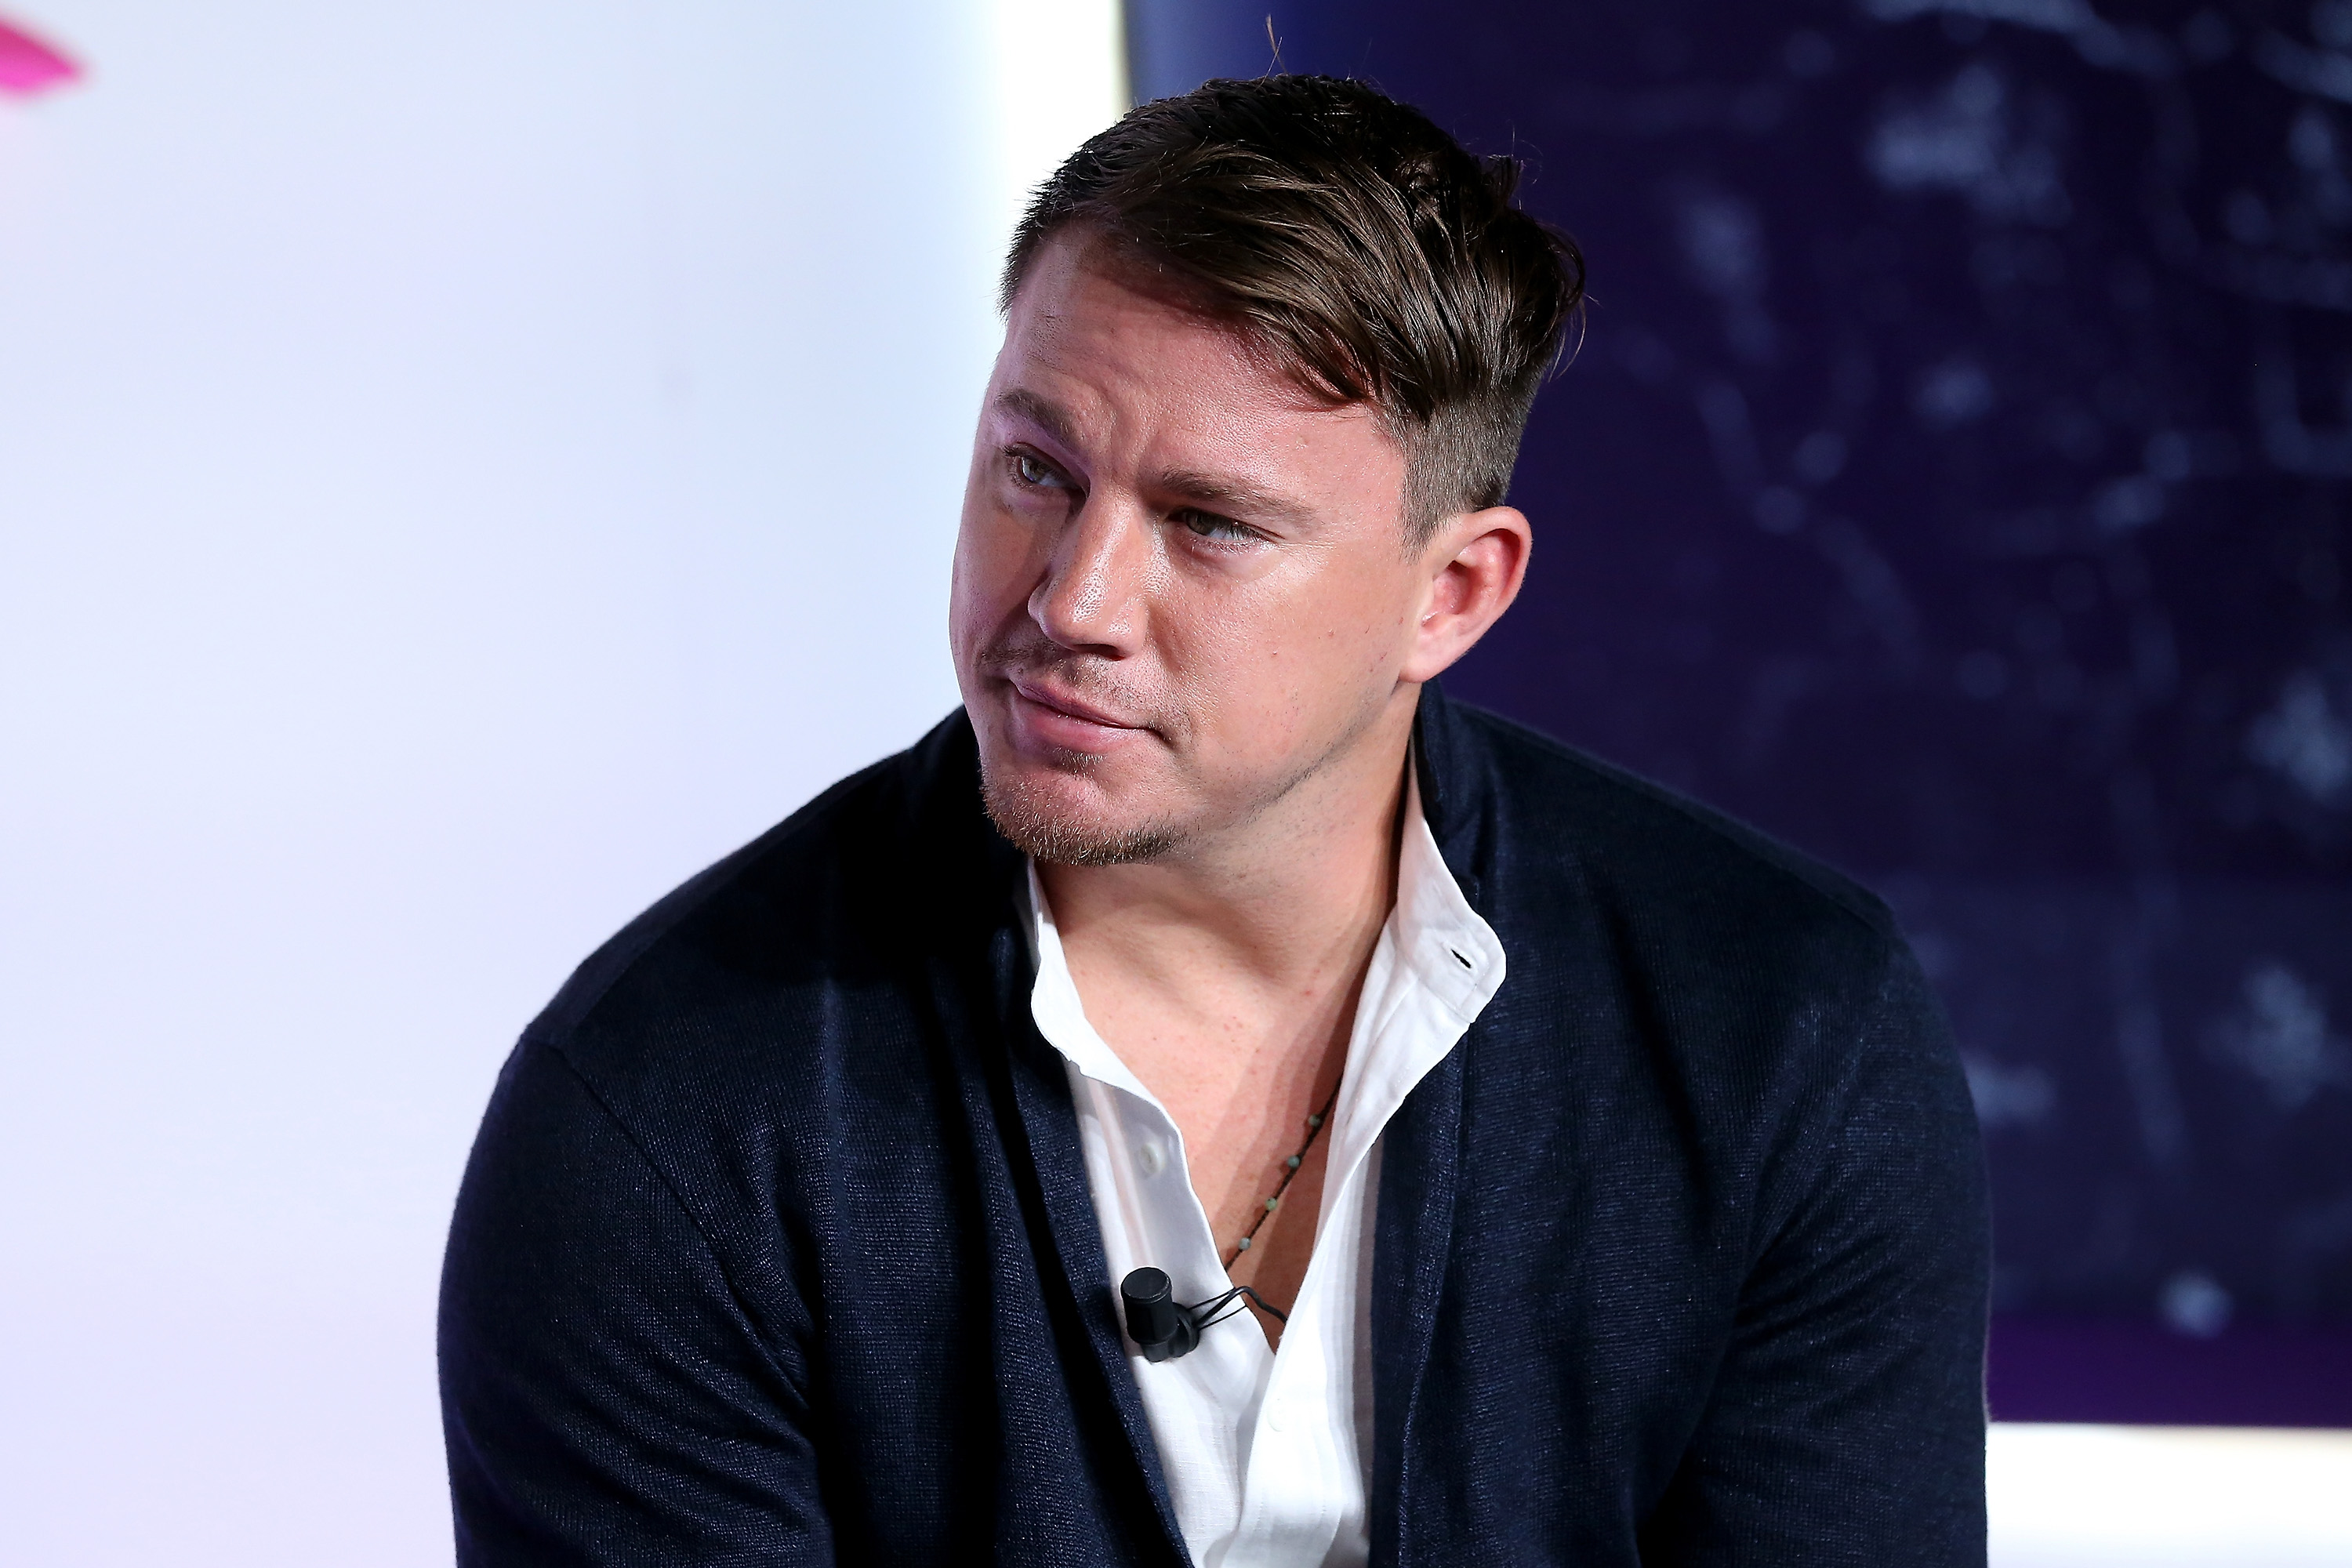 CANNES, FRANCE - JUNE 23: Actor Channing Tatum speaks during "bred for content" seminar hosted by UTA during The Cannes Lions 2016 on June 23, 2016 in Cannes, France.  (Photo by Romain Perrocheau/Getty Images) (Romain Perrocheau—Getty Images)